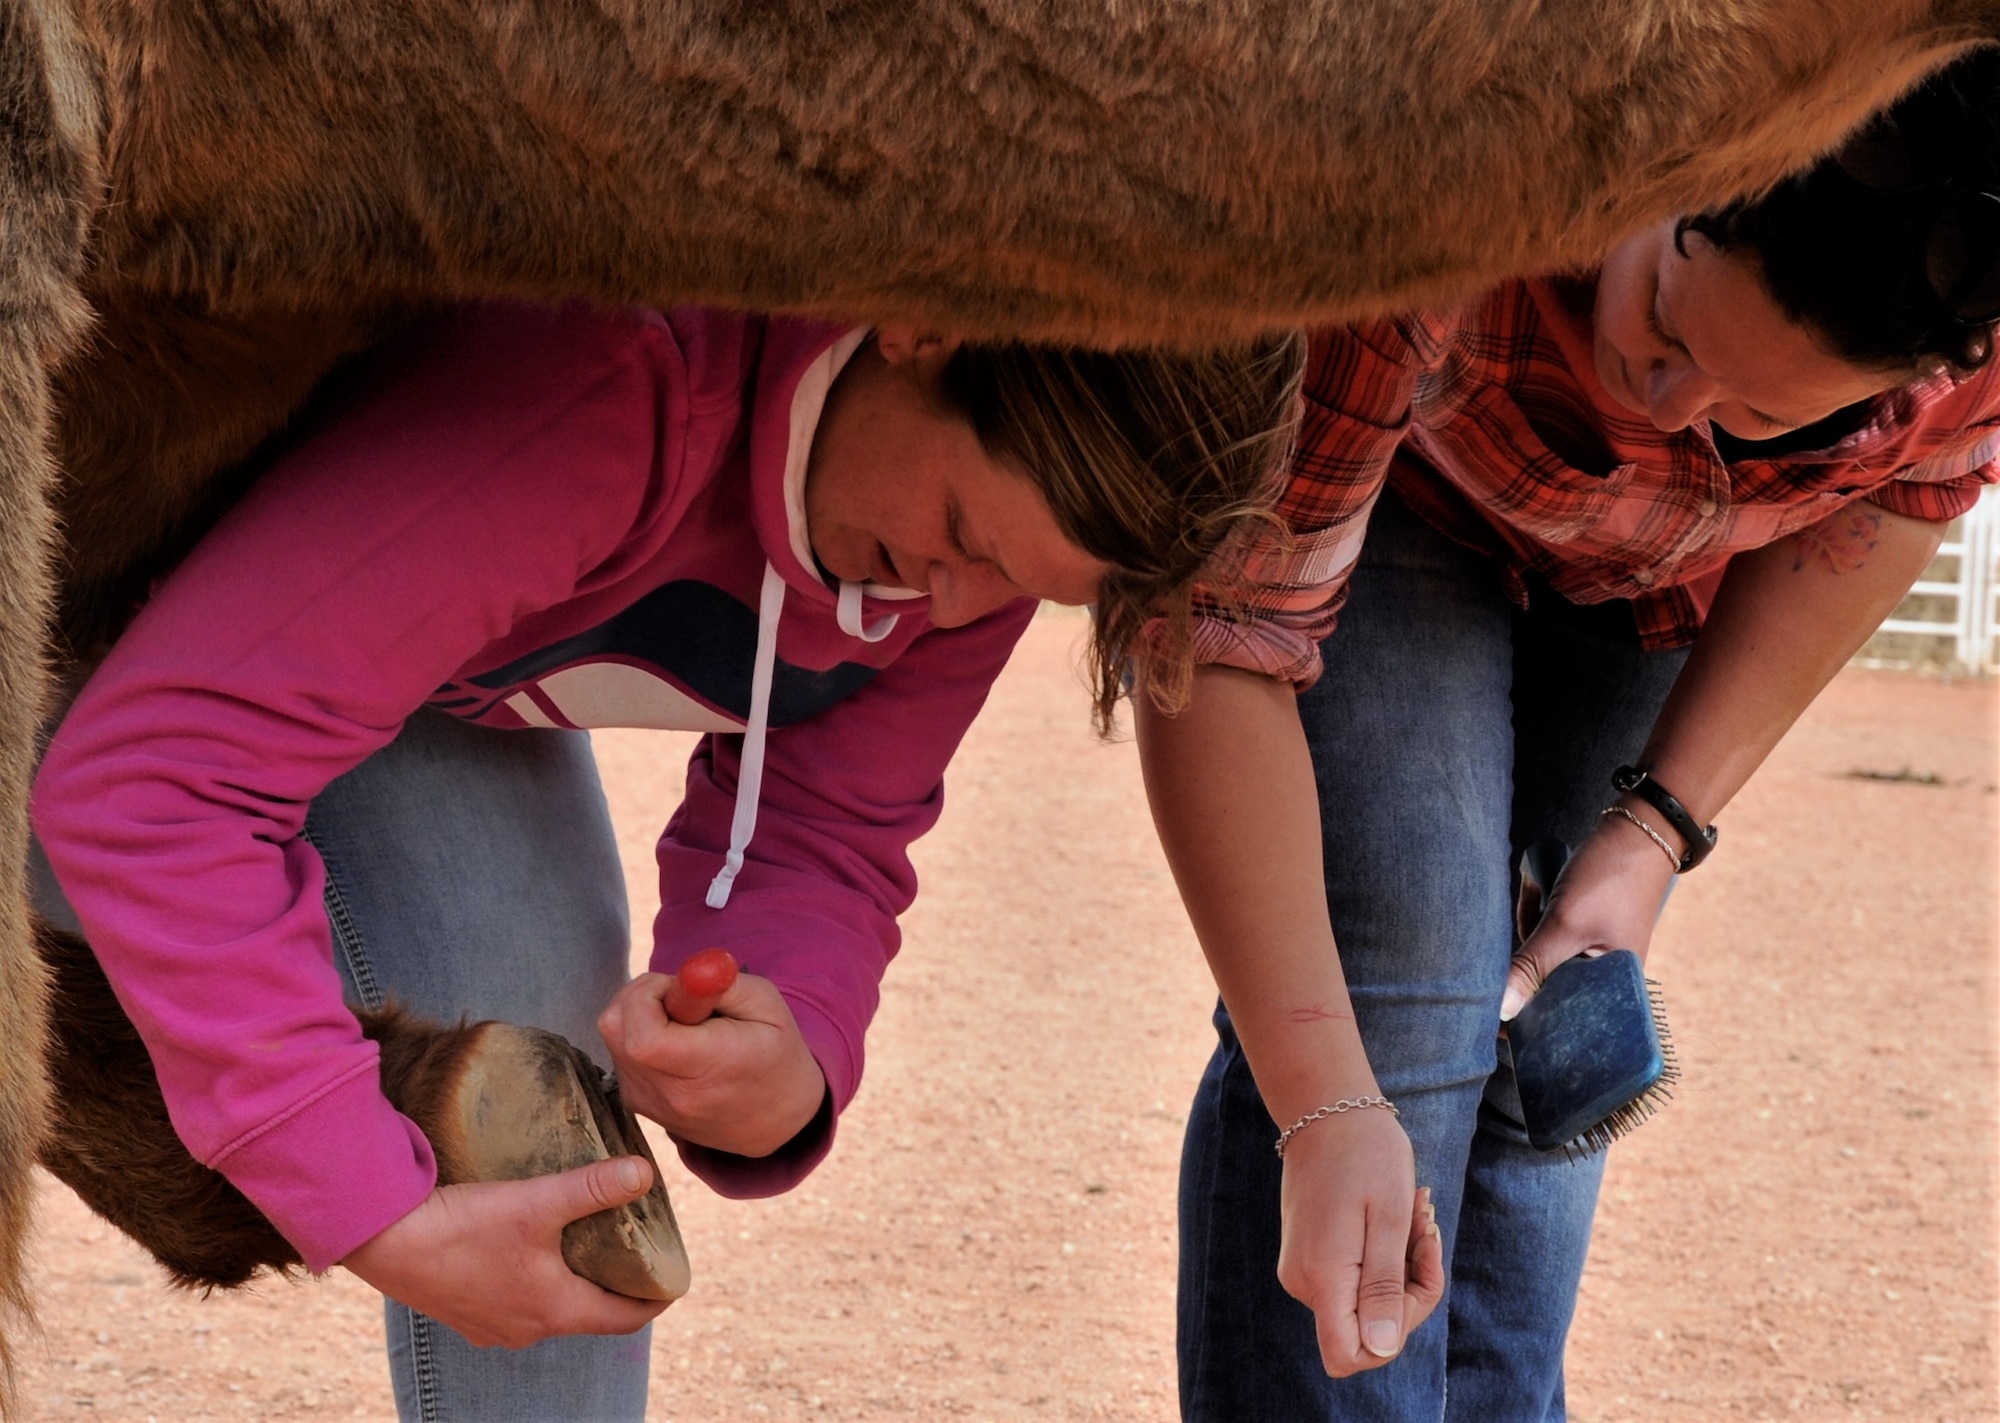 Tech. Sgt. Tanesha Fierro, right, a 34th Aeromedical Evacuation Squadron aviation resource manager, teaches a patient how to clean a horse’s hoof during an equine therapy session at the Norris Penrose Events Center in Colorado Springs, Colorado, April 4, 2018.